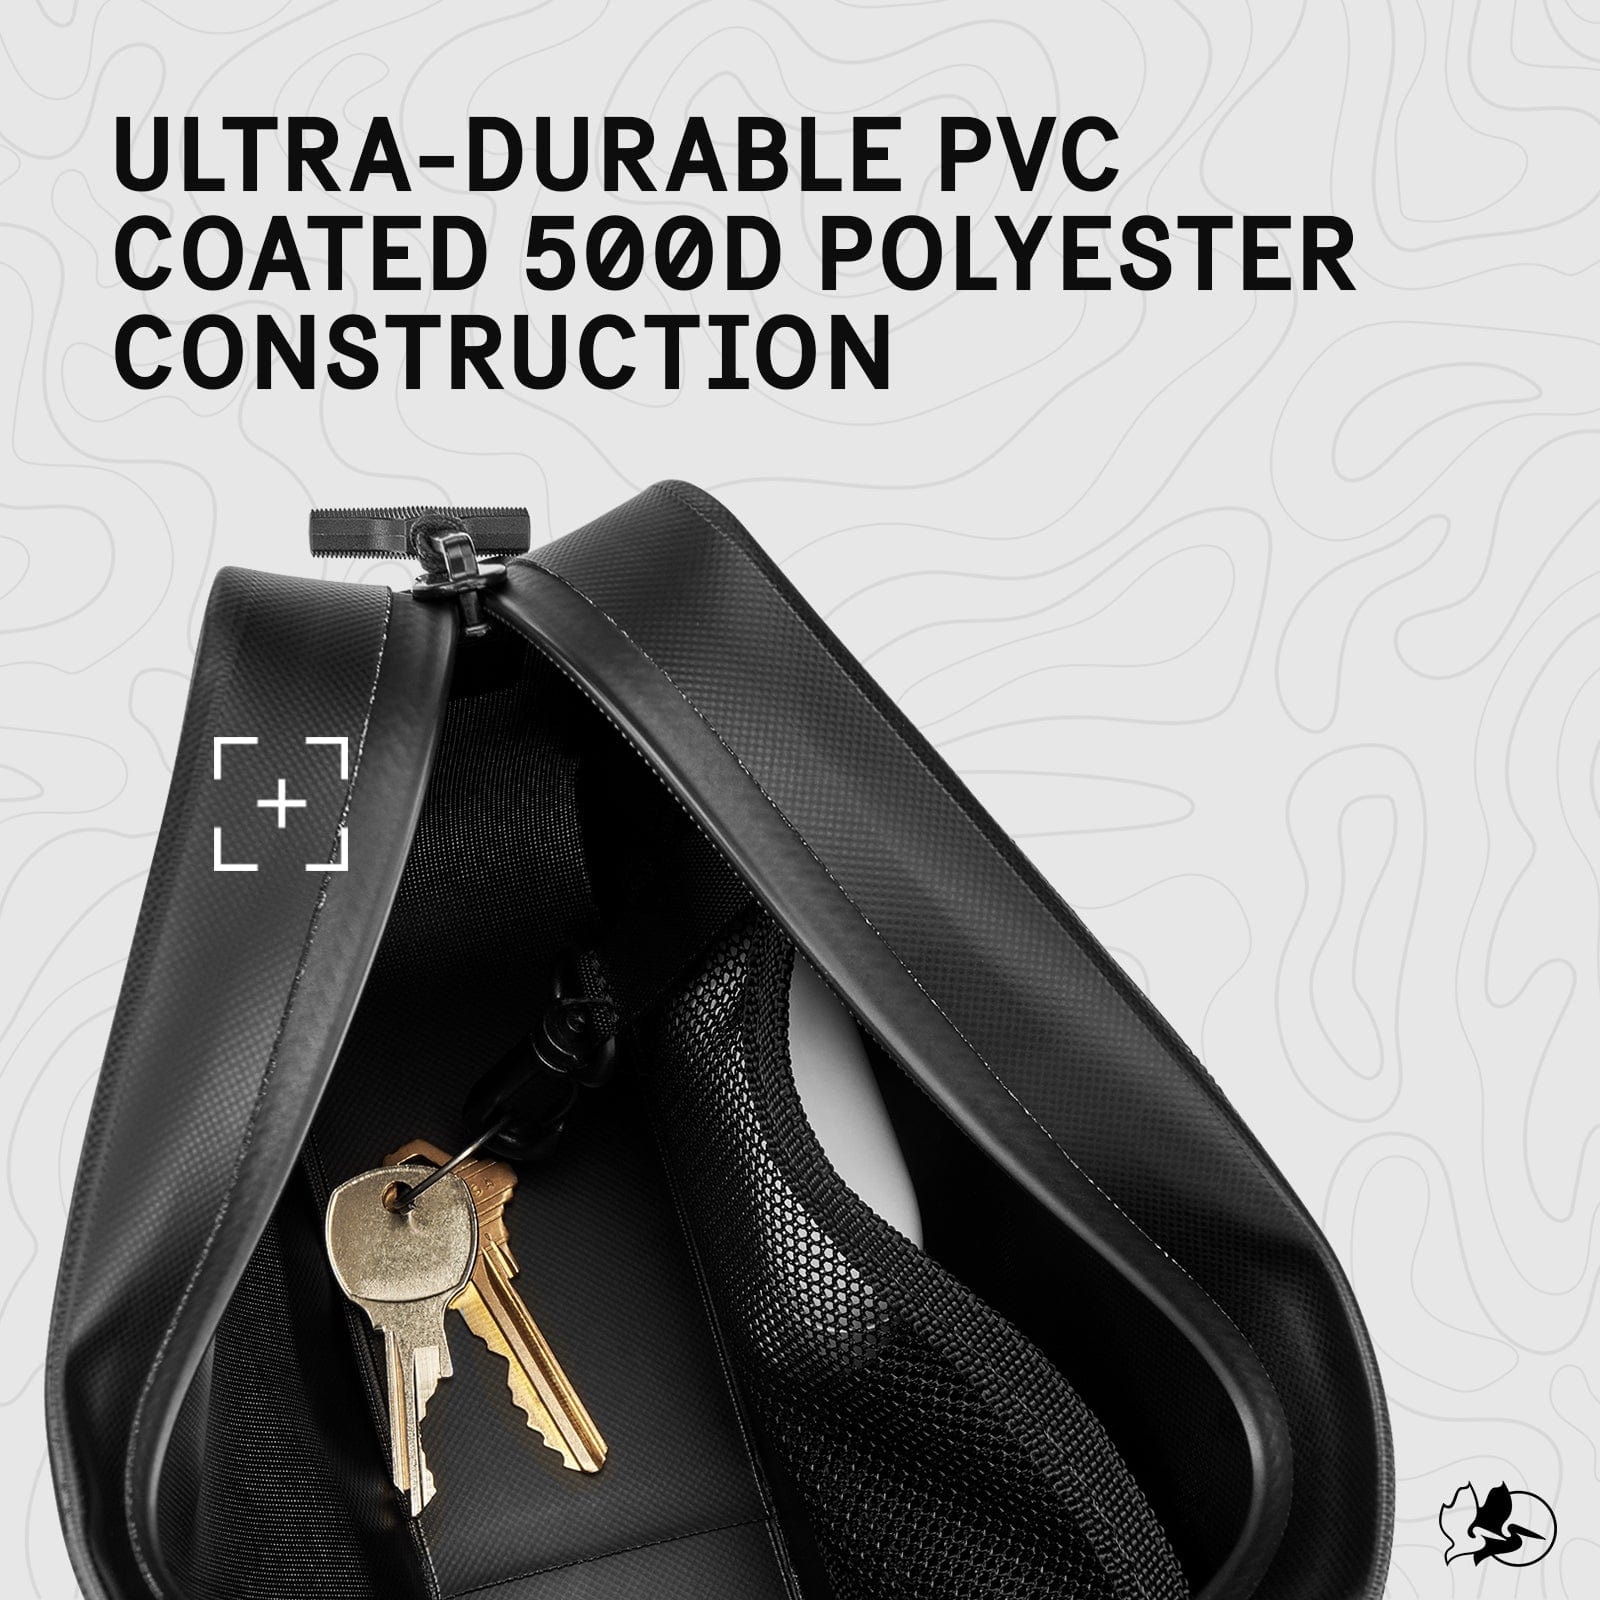 ULTRA-DURABLE PVC COATED 500D POLYESTER CONSTRUCTION